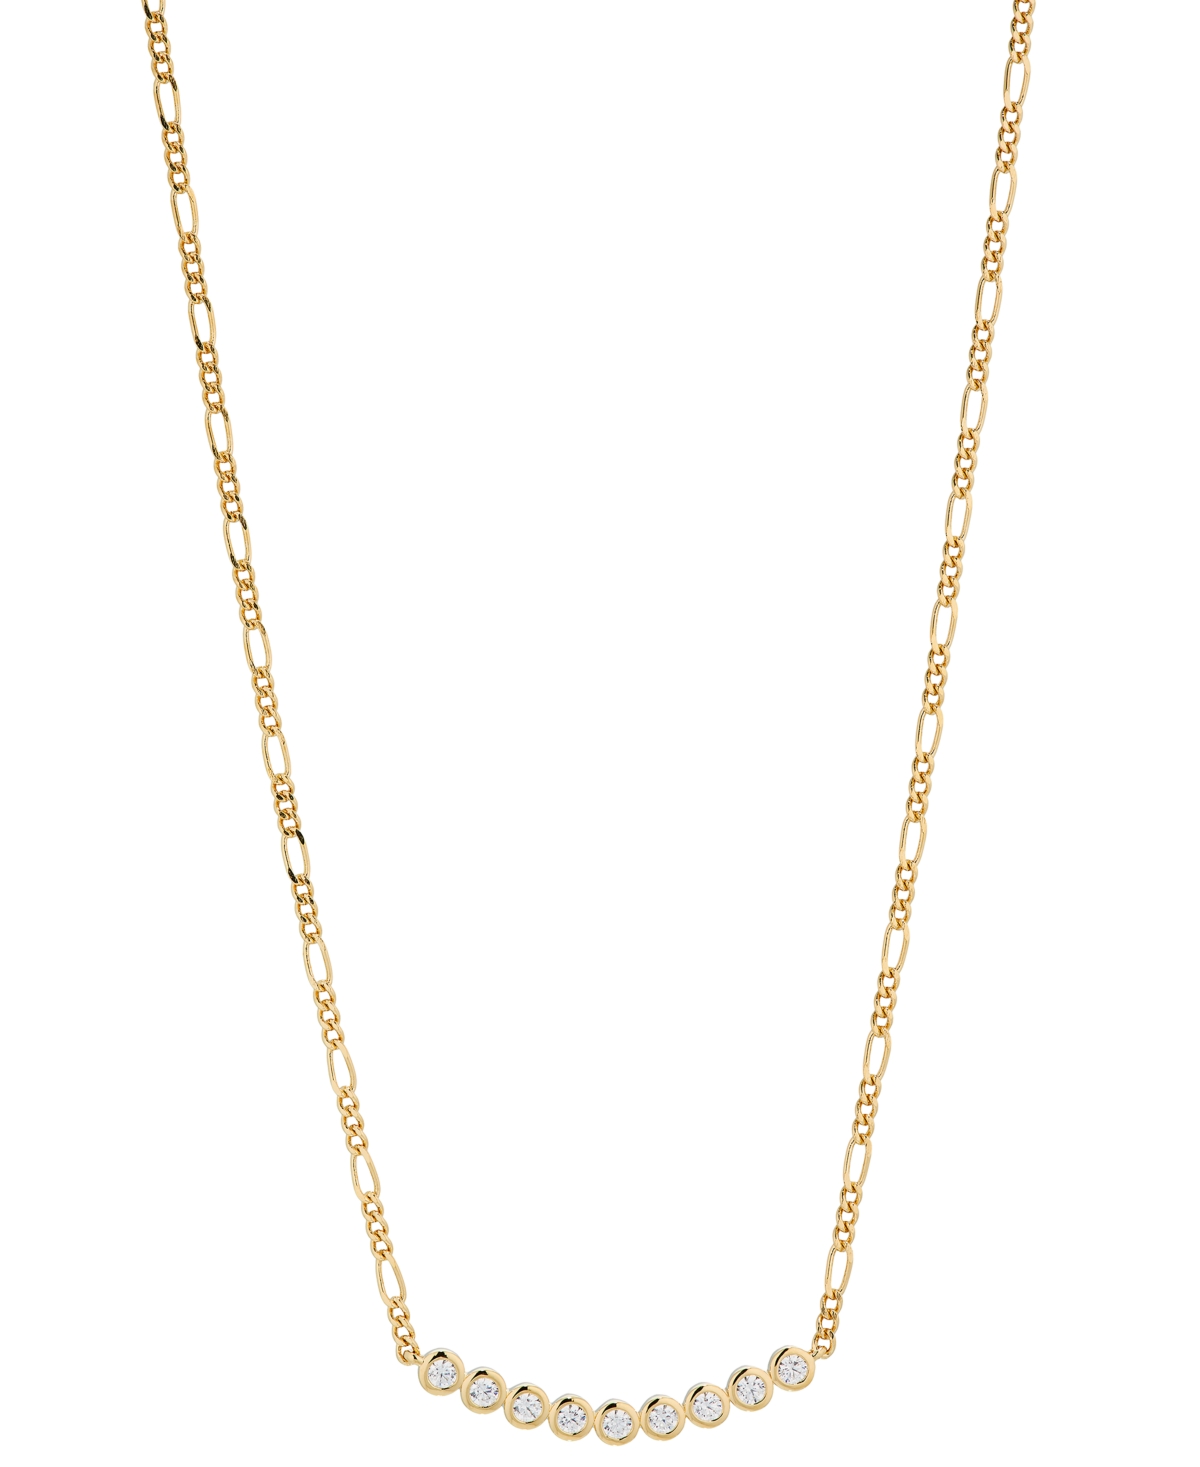 18k Gold-Plated Cubic Zirconia Statement Necklace, 16" + 2" extender - Gold